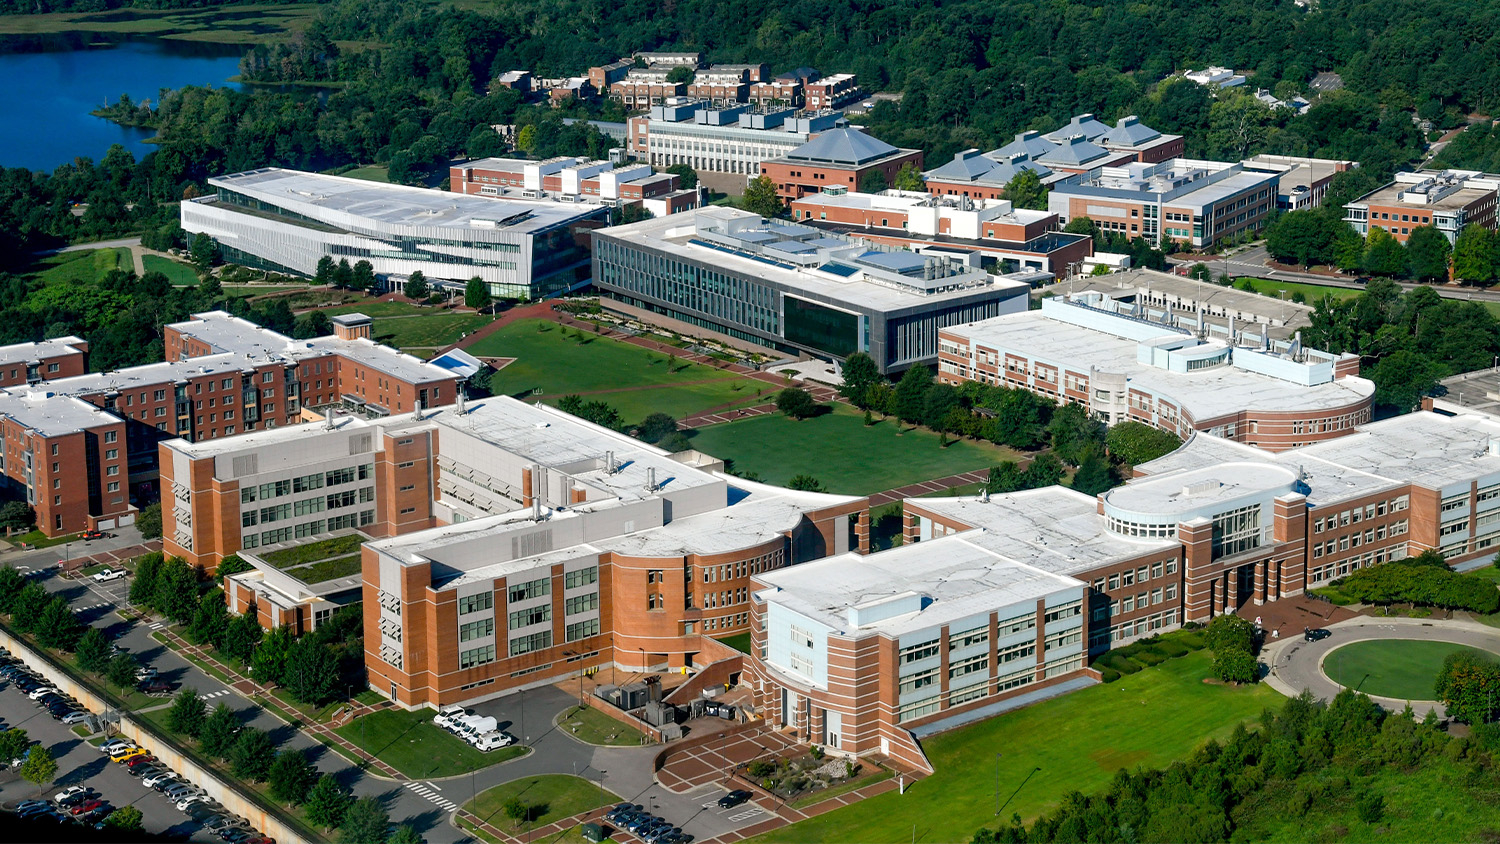 Aerial view of Centennial Campus, with the oval-shaped green space in the middle of a block of buildings